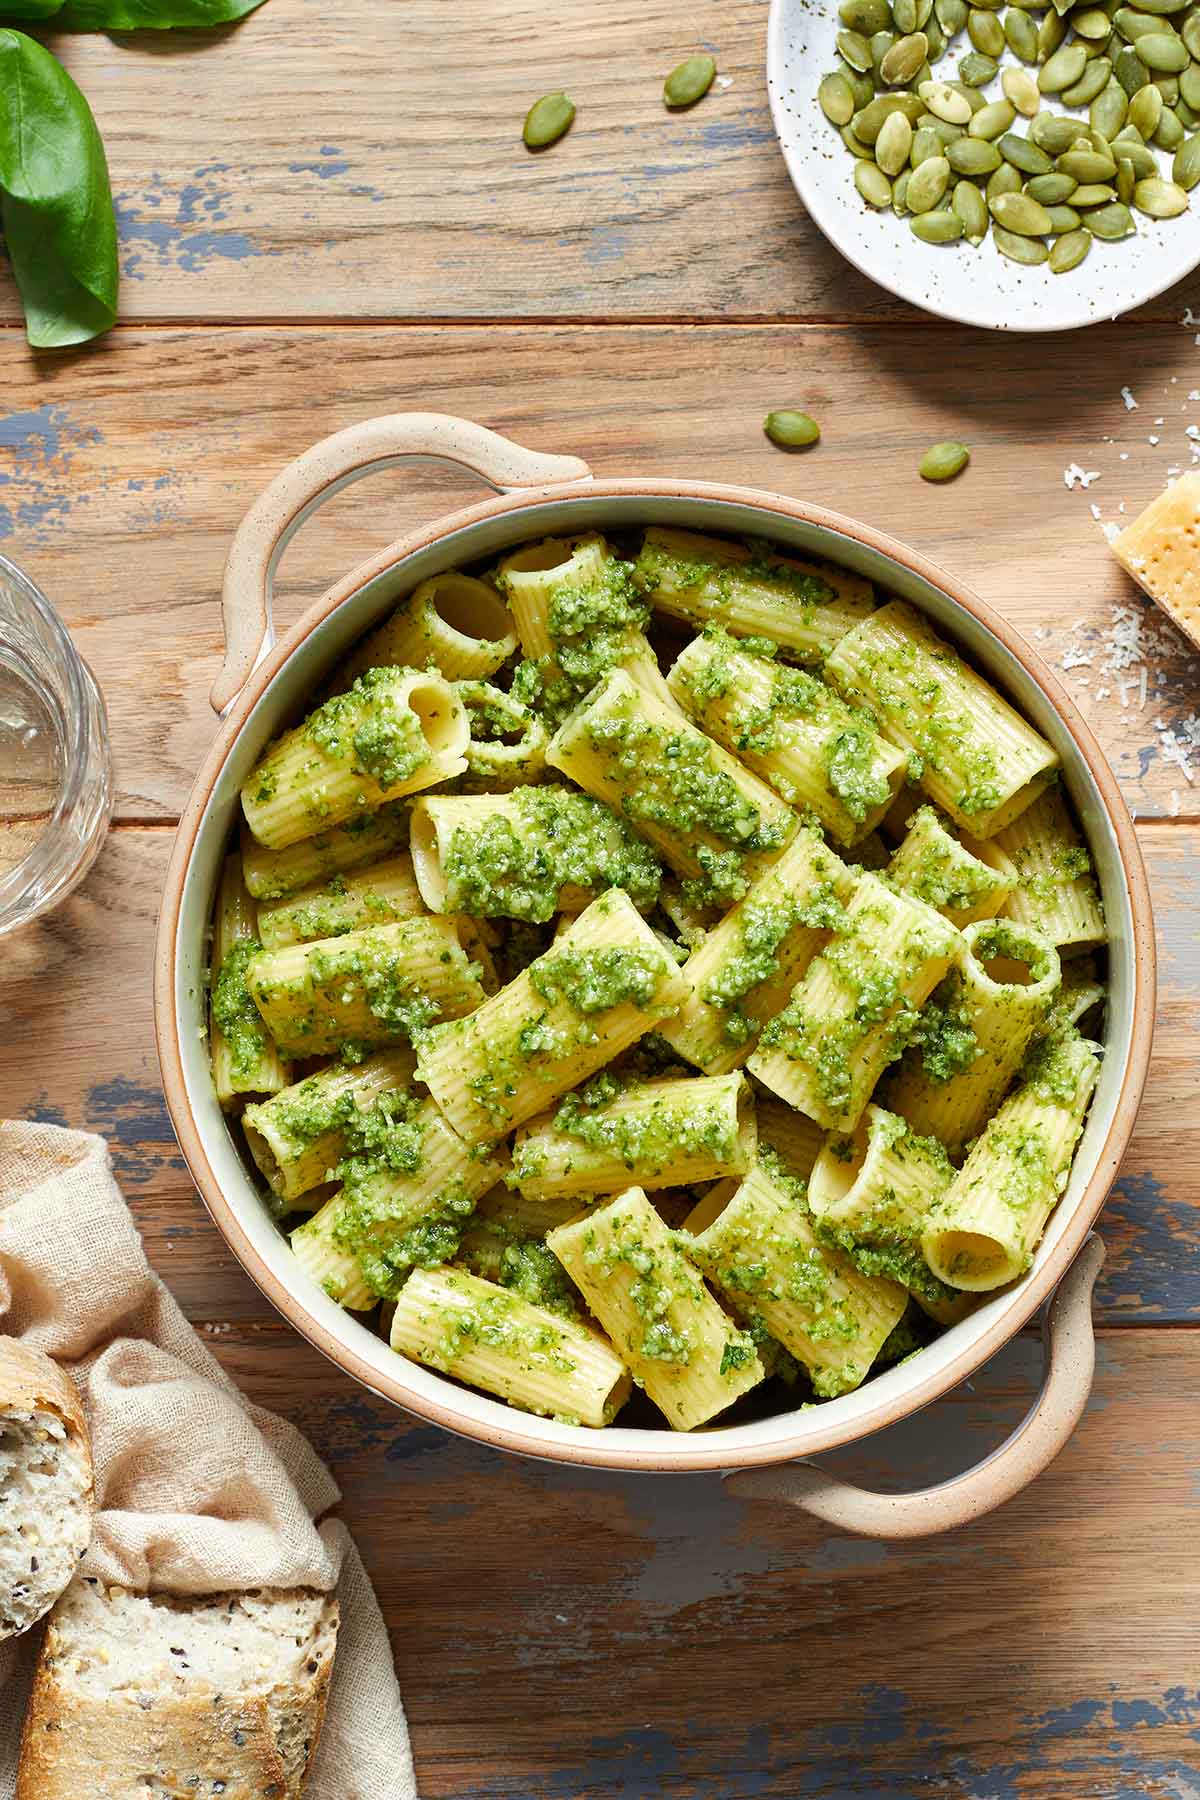 Pesto pasta in a bowl with crusty bread, cheese and pumpkin seeds on the side.